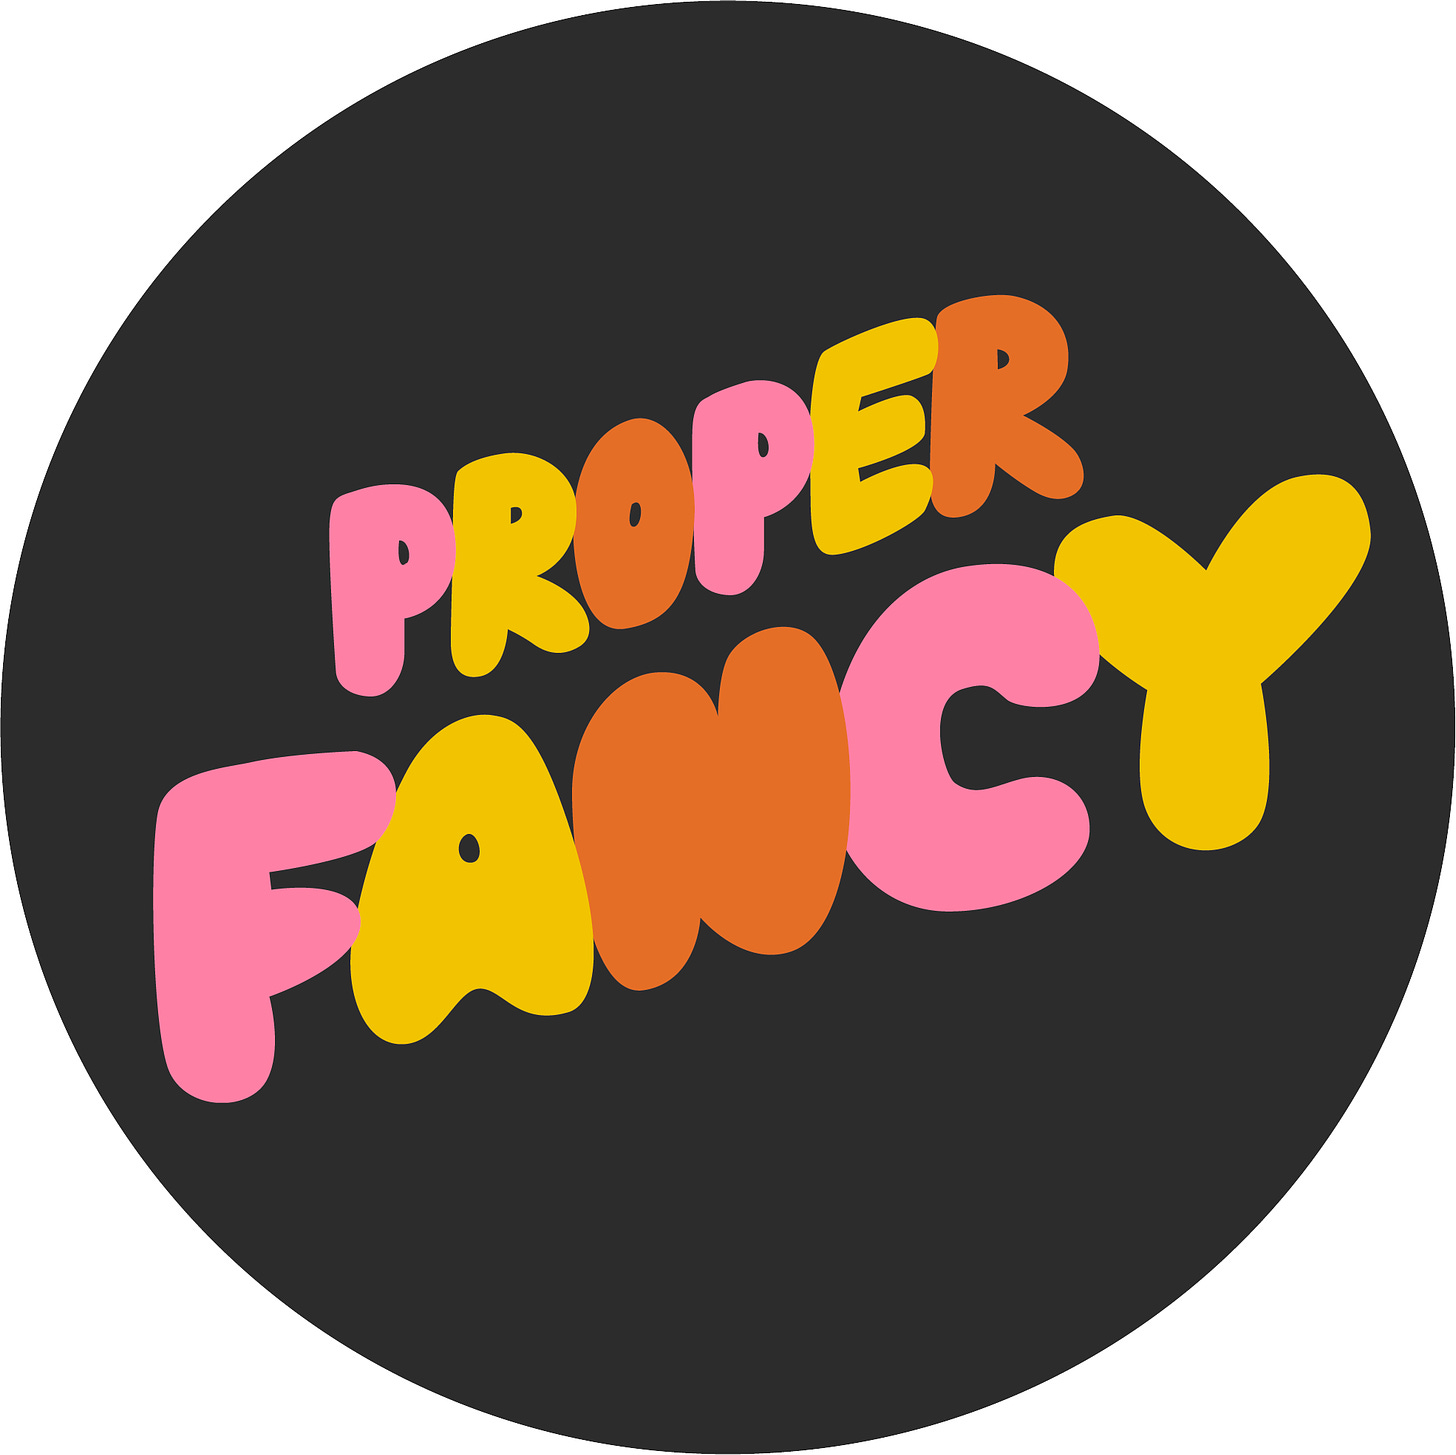 Inside a black circle are the words 'proper fancy'. The font is balloon-like and each of the letters is a different colour including orange, yellow and pink